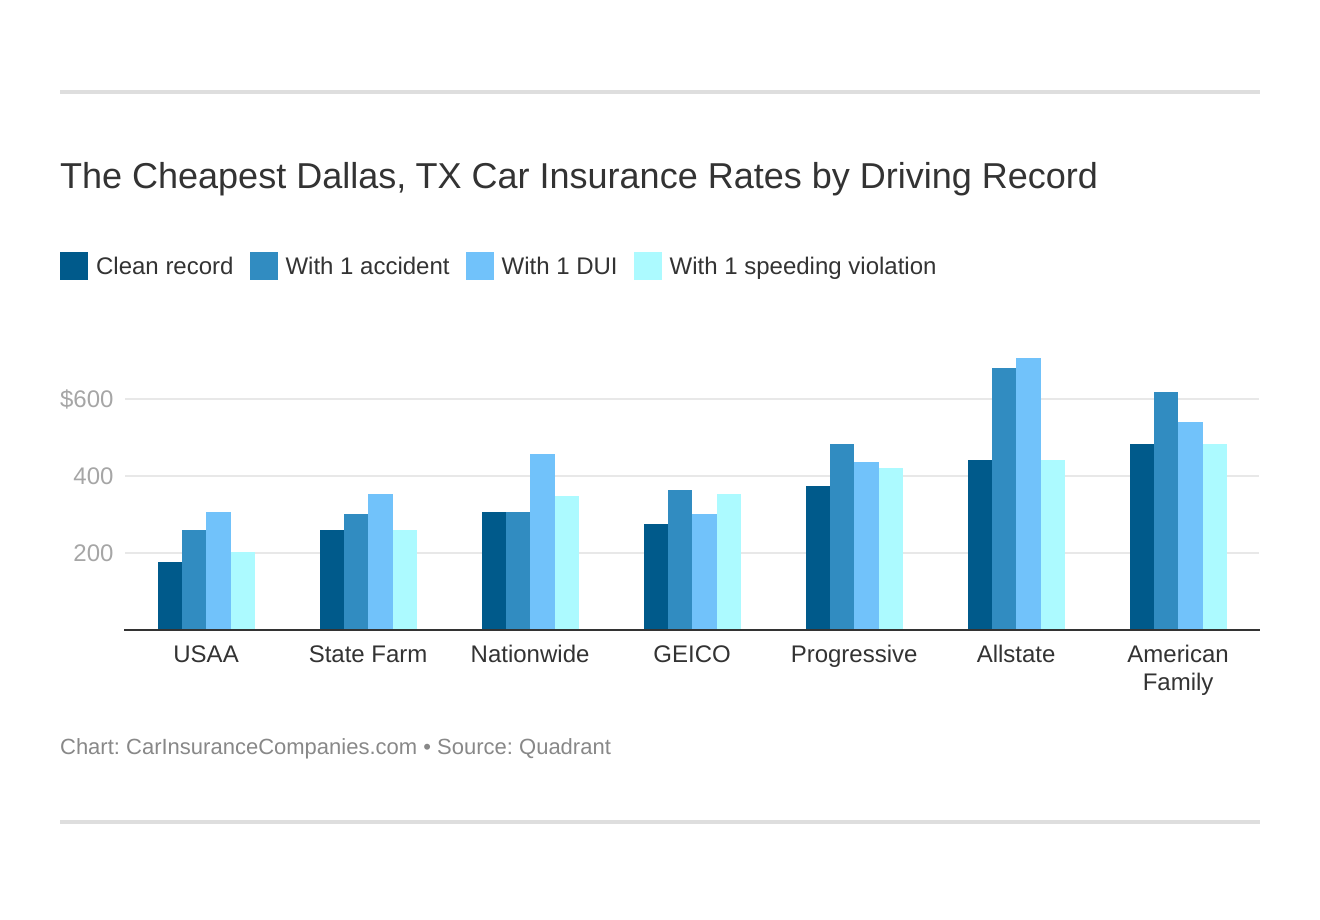 The Cheapest Dallas, TX Car Insurance Rates by Driving Record